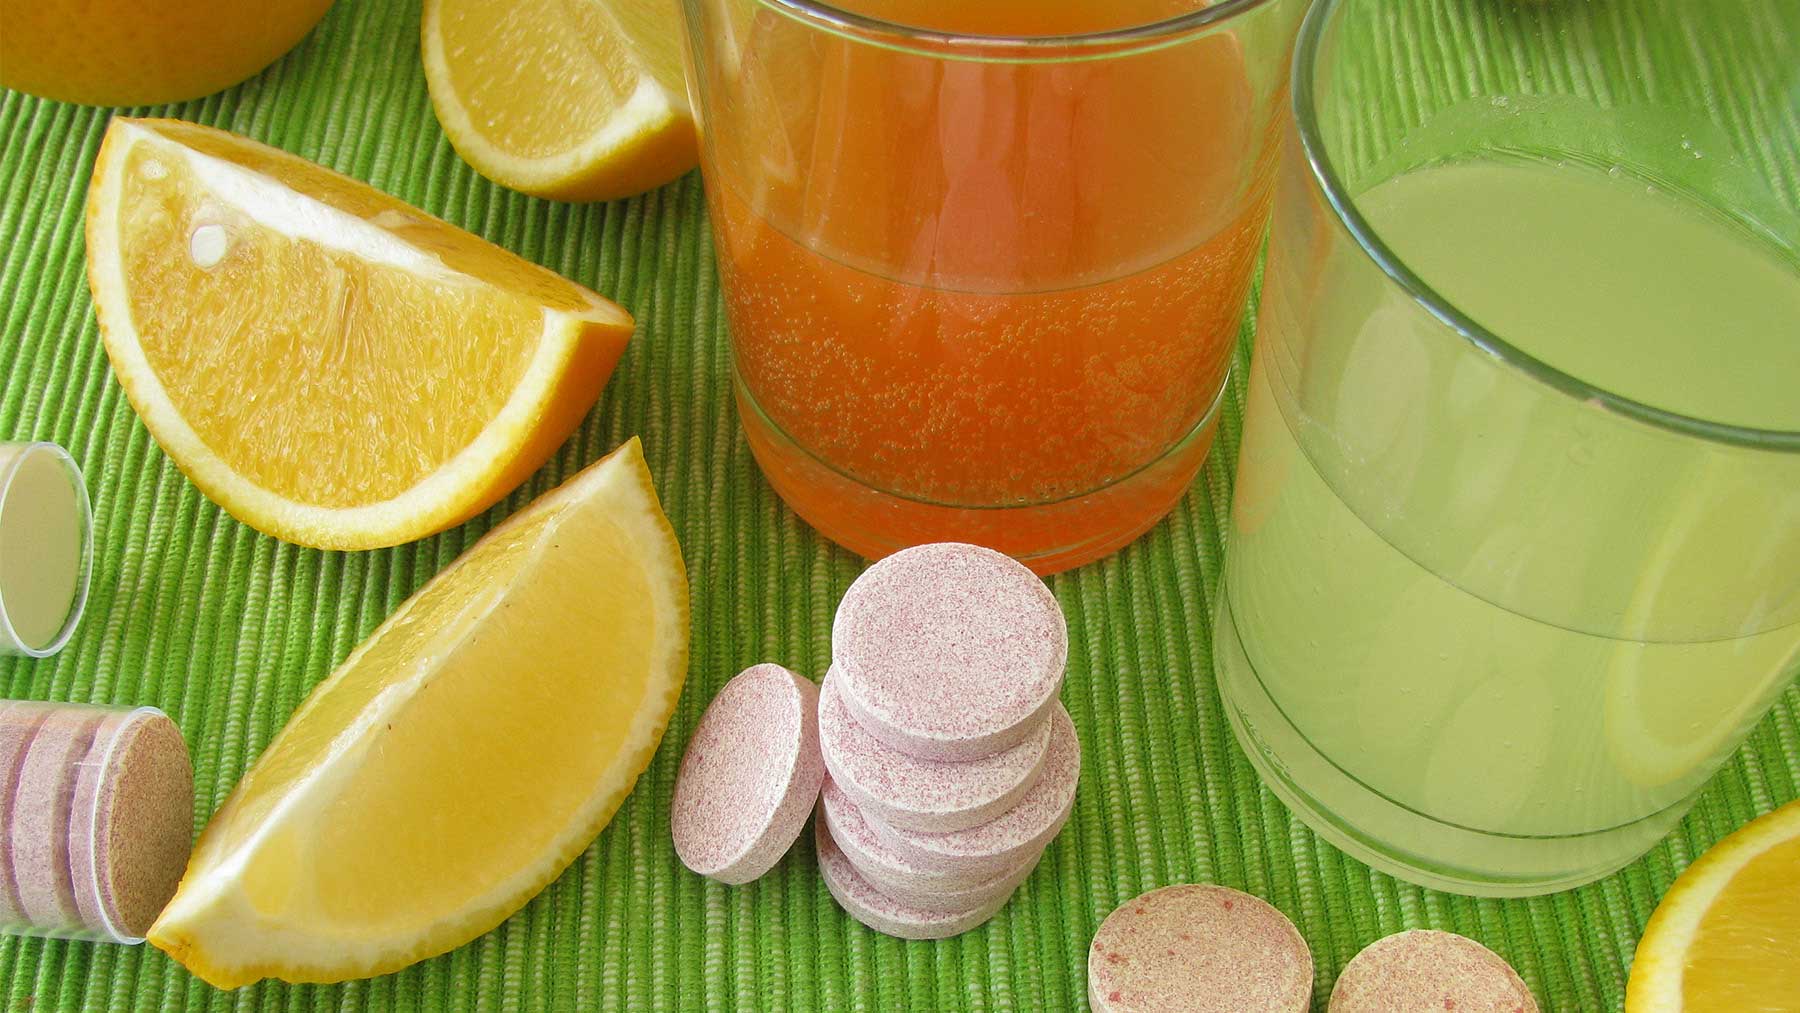 can vitamin c and other immune boosters help a cold? | ohio state